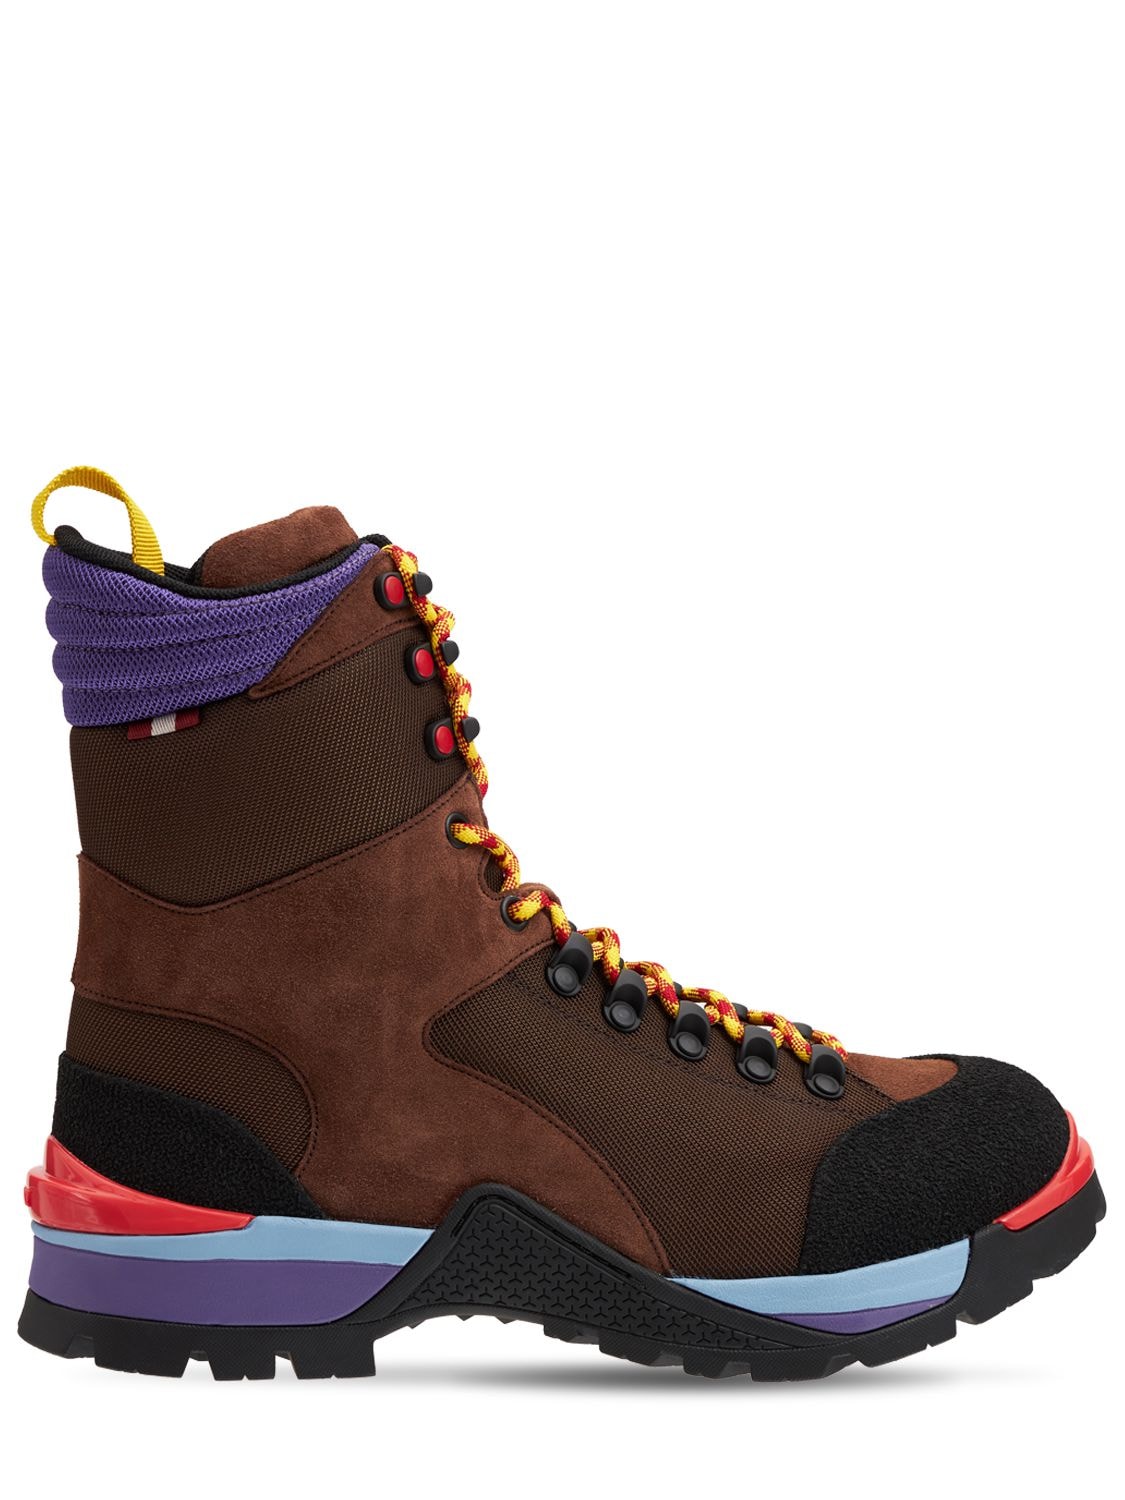 BALLY HIKE BOOTS,74I0Y8014-Q09DT05VVA2